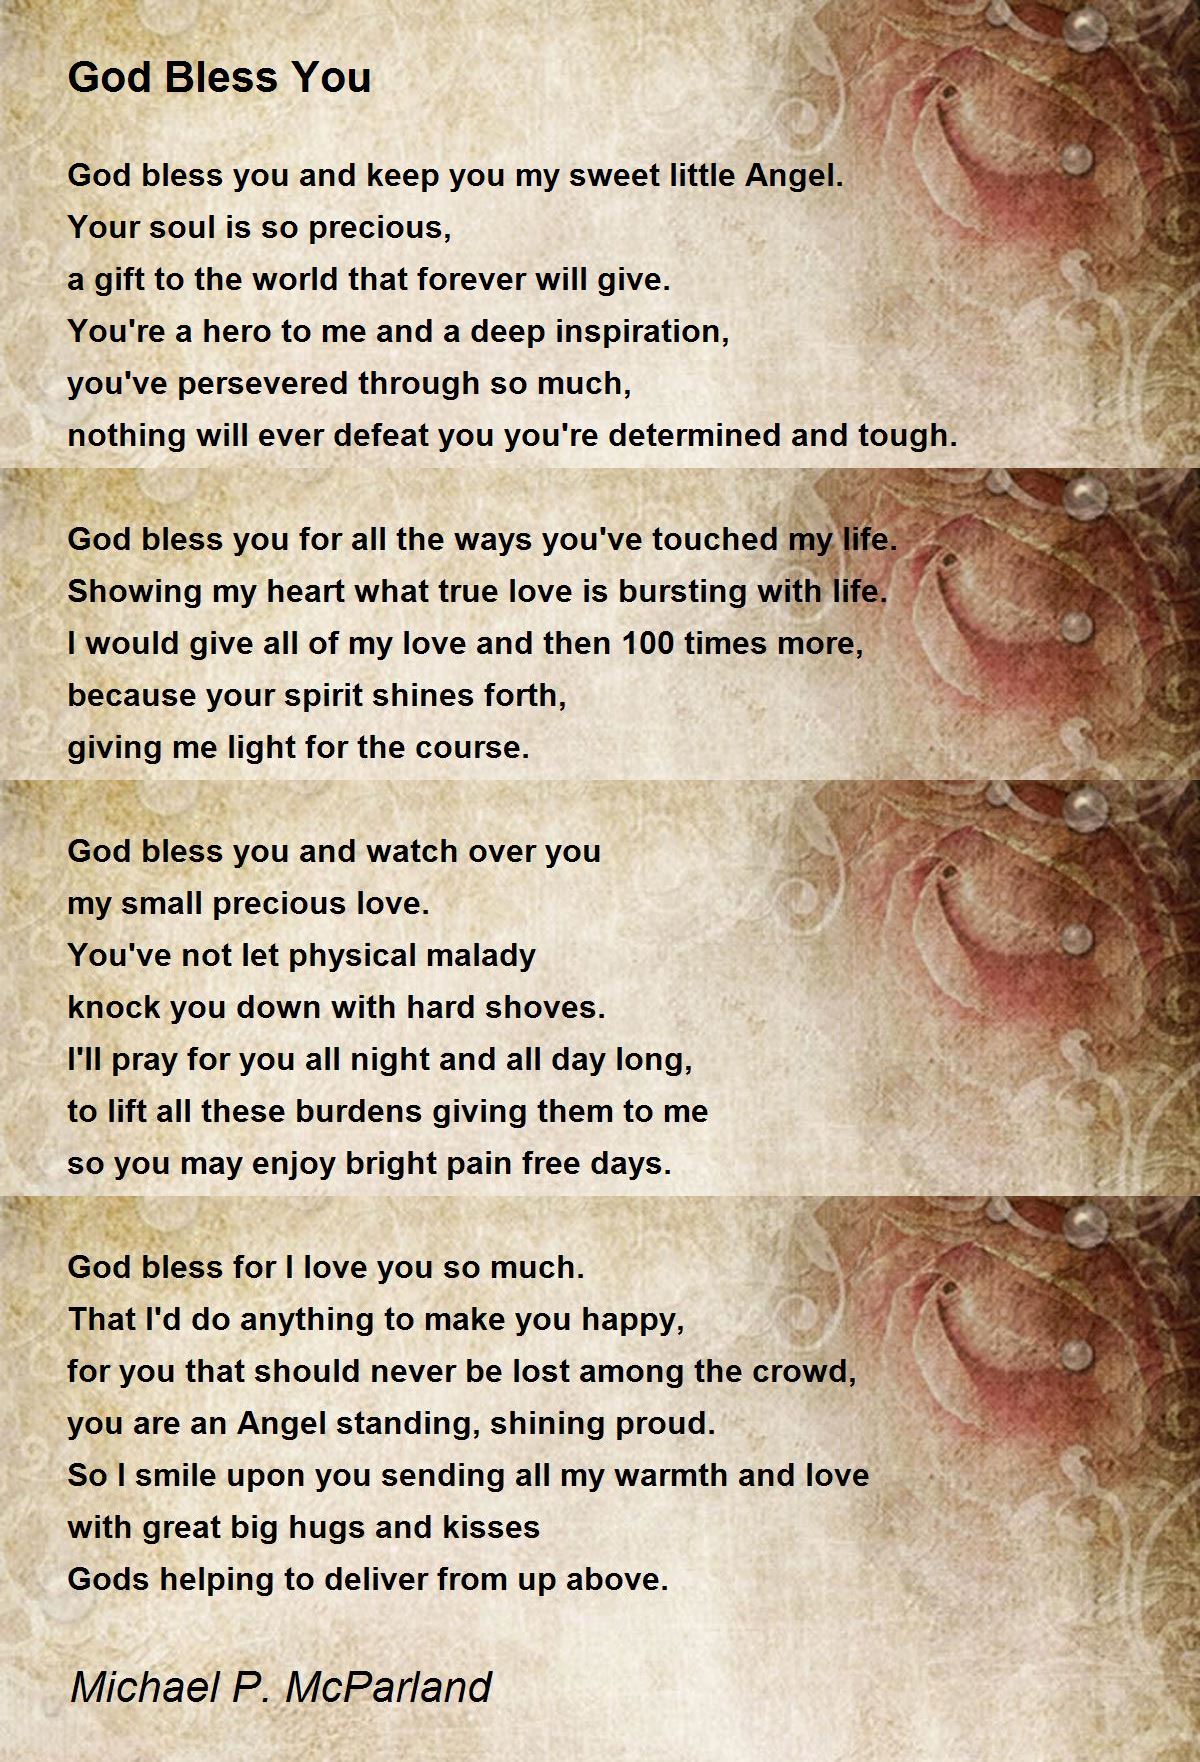 God Bless You - God Bless You Poem by Michael P. McParland